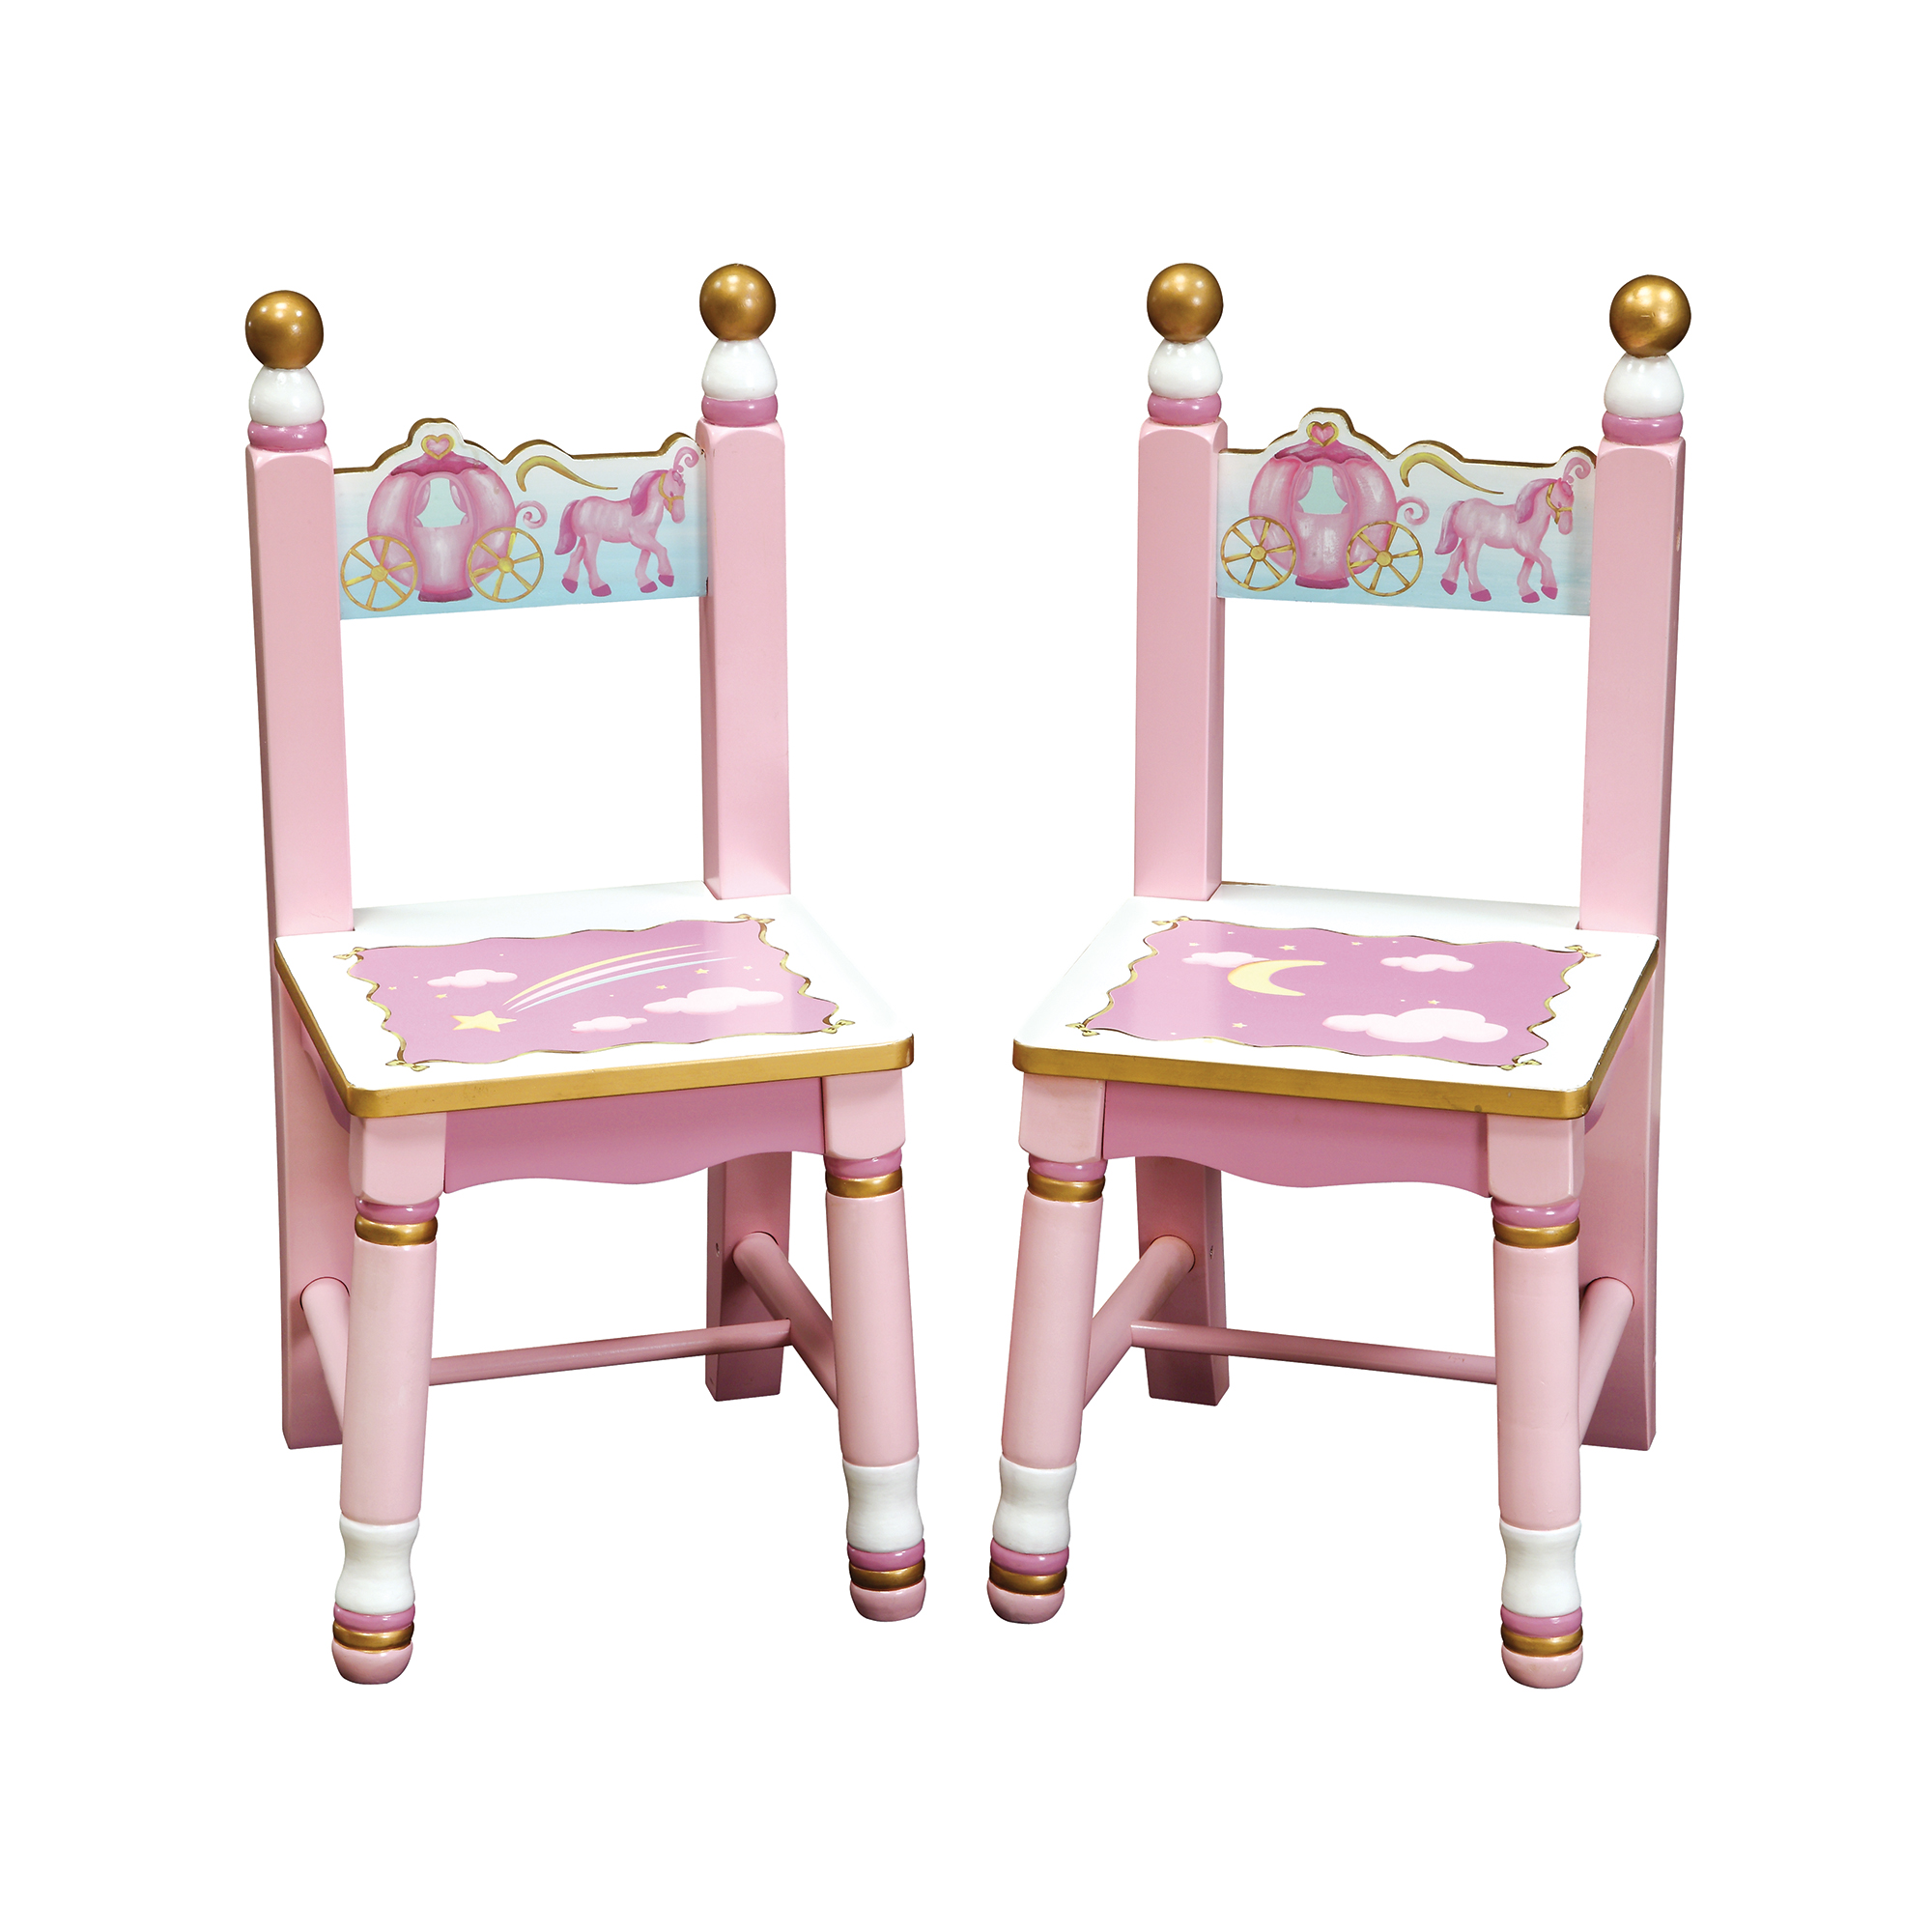 Princess Extra Chairs - image 1 of 2